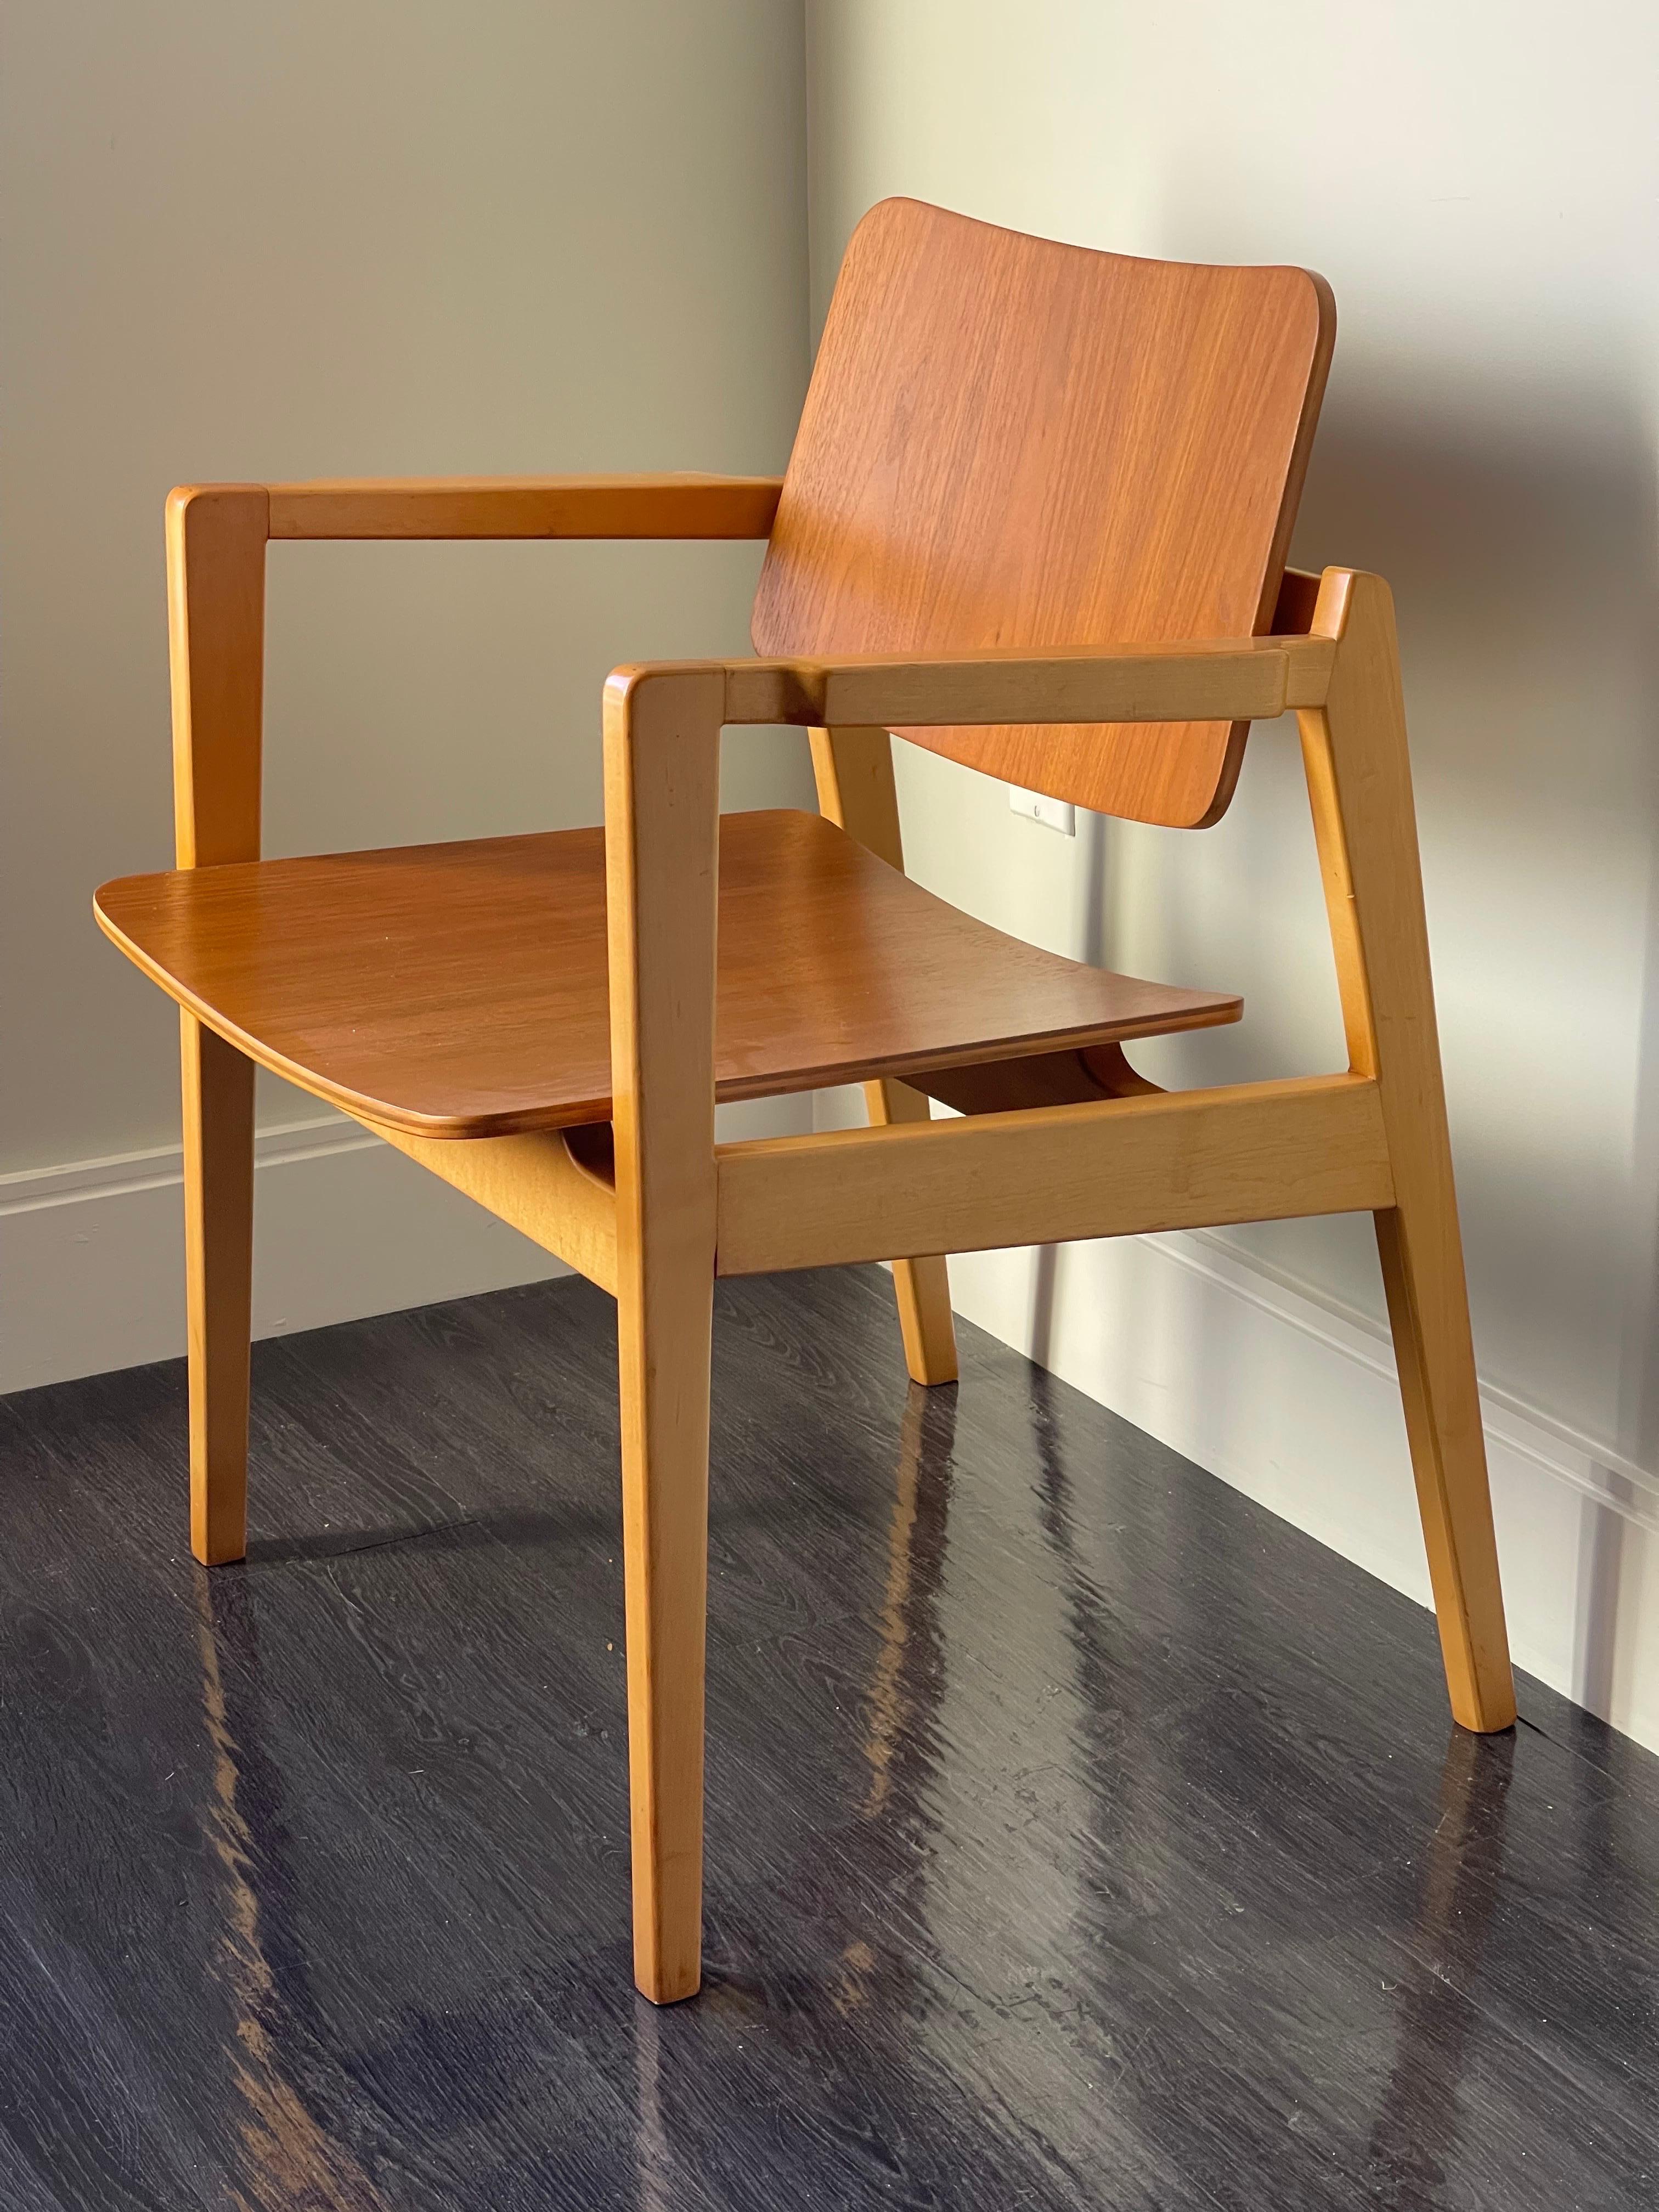 Rare early C-150 armchair by Jens Risom introduced in 1951. There wasn't a large production of these - this period is when Jens Risom would be opening his own plant in 1954 to be in total control of his operations, and he experimented with different